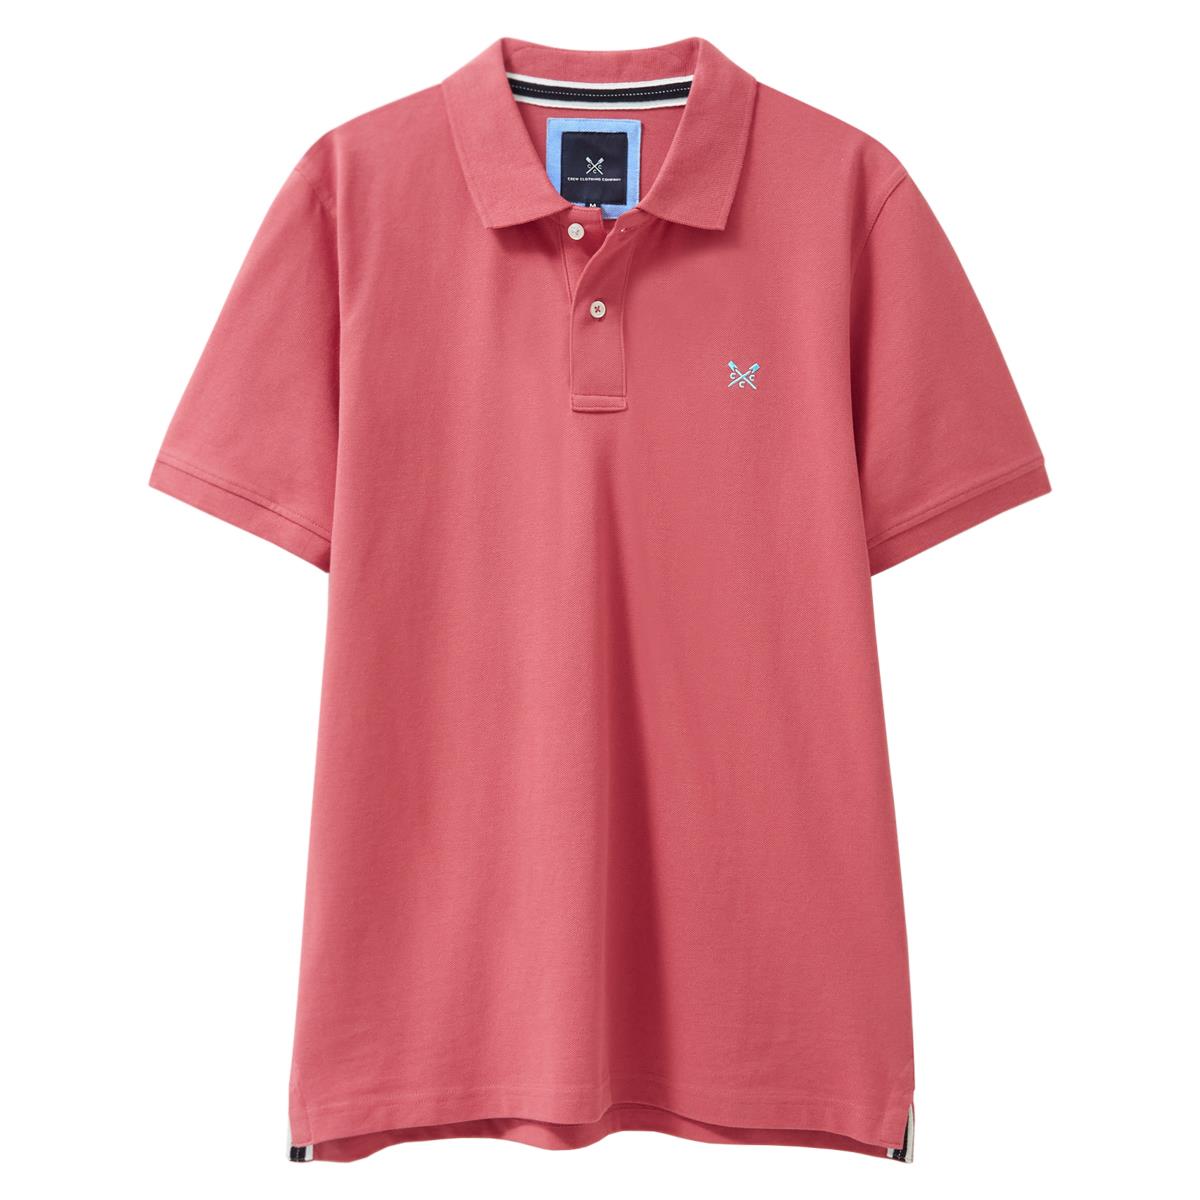 Crew Clothing Mens Classic Pique Polo Shirt Questions & Answers